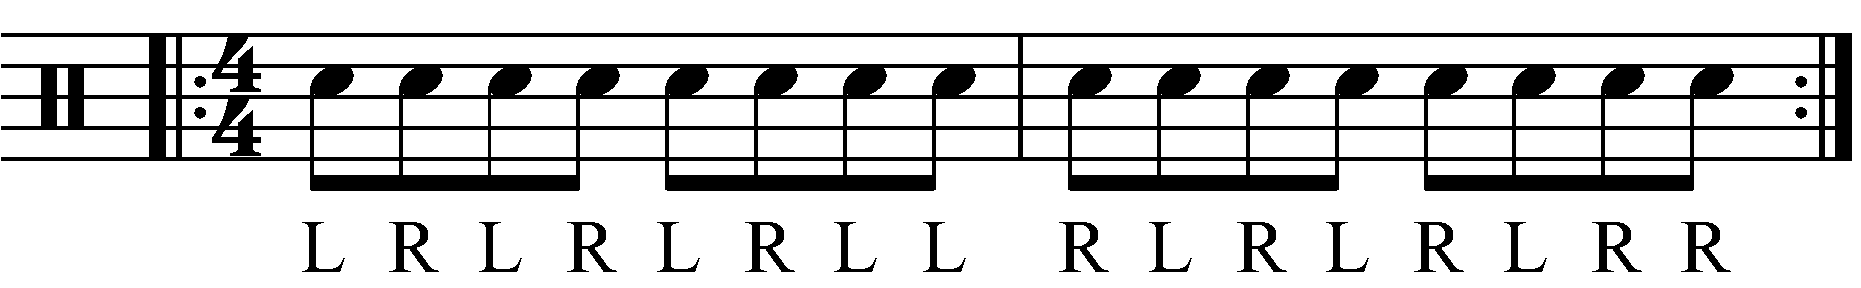 A triple paradiddle in reverse sticking.